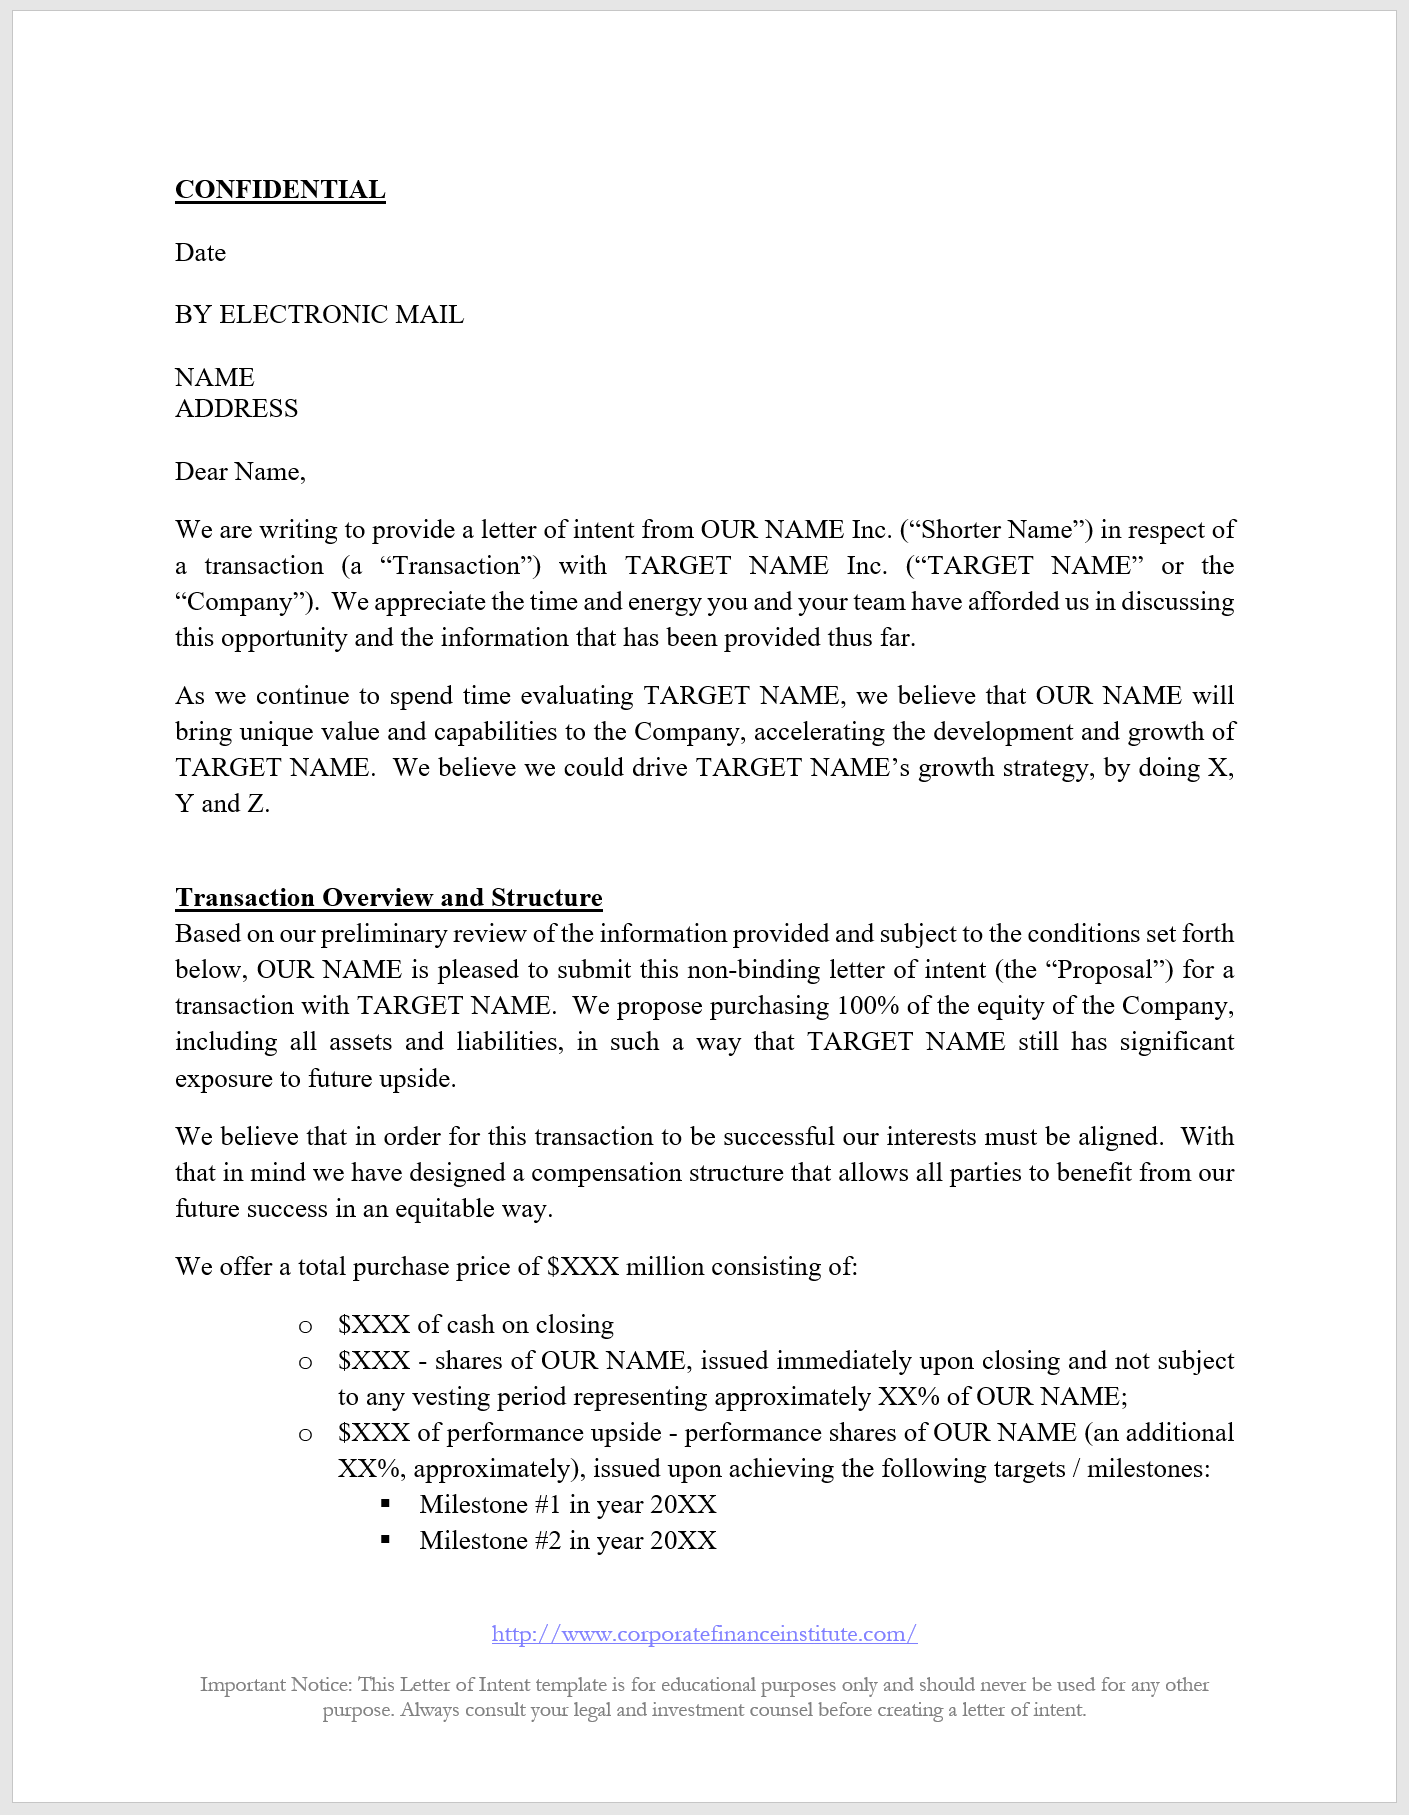 Sample Consulting Proposal Letter from corporatefinanceinstitute.com